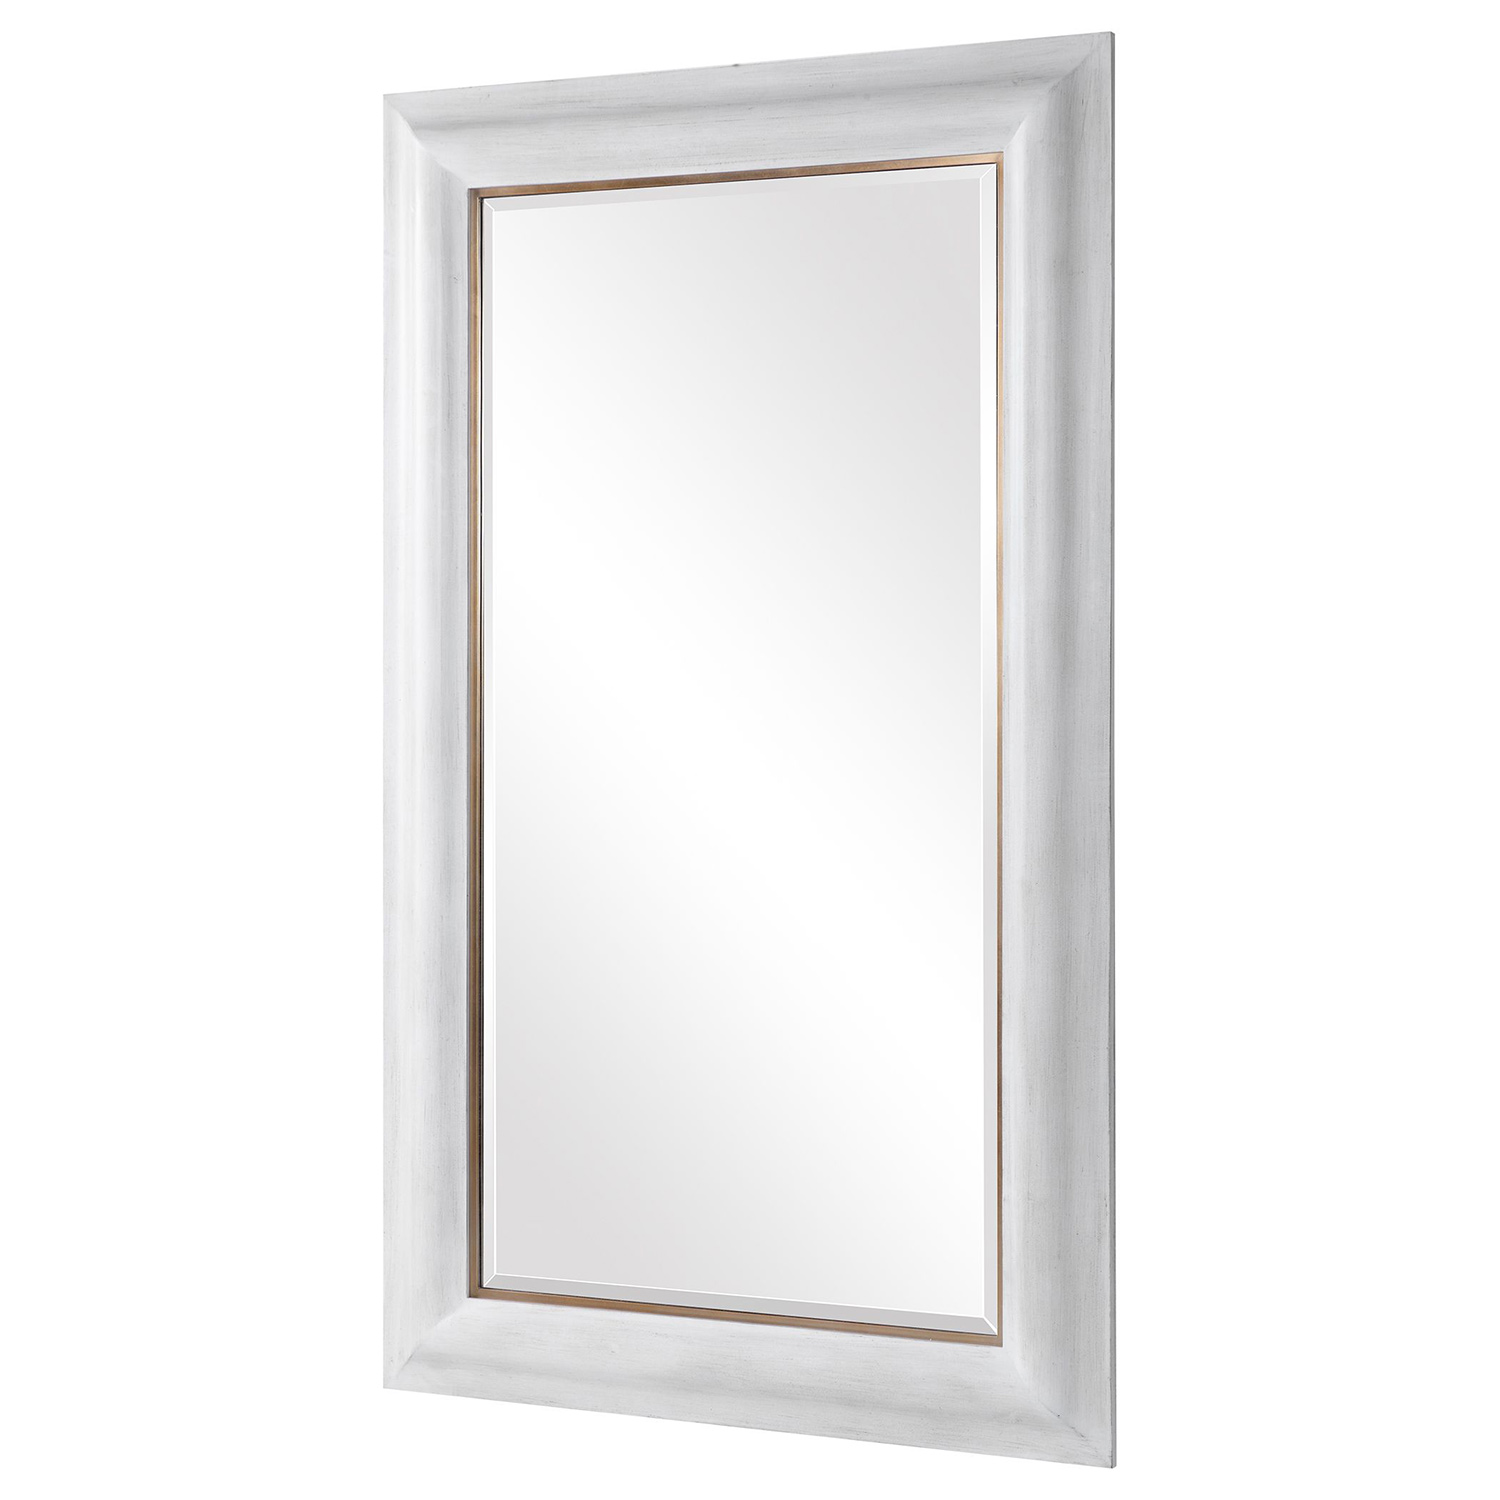 Uttermost Piper Large Mirror - White